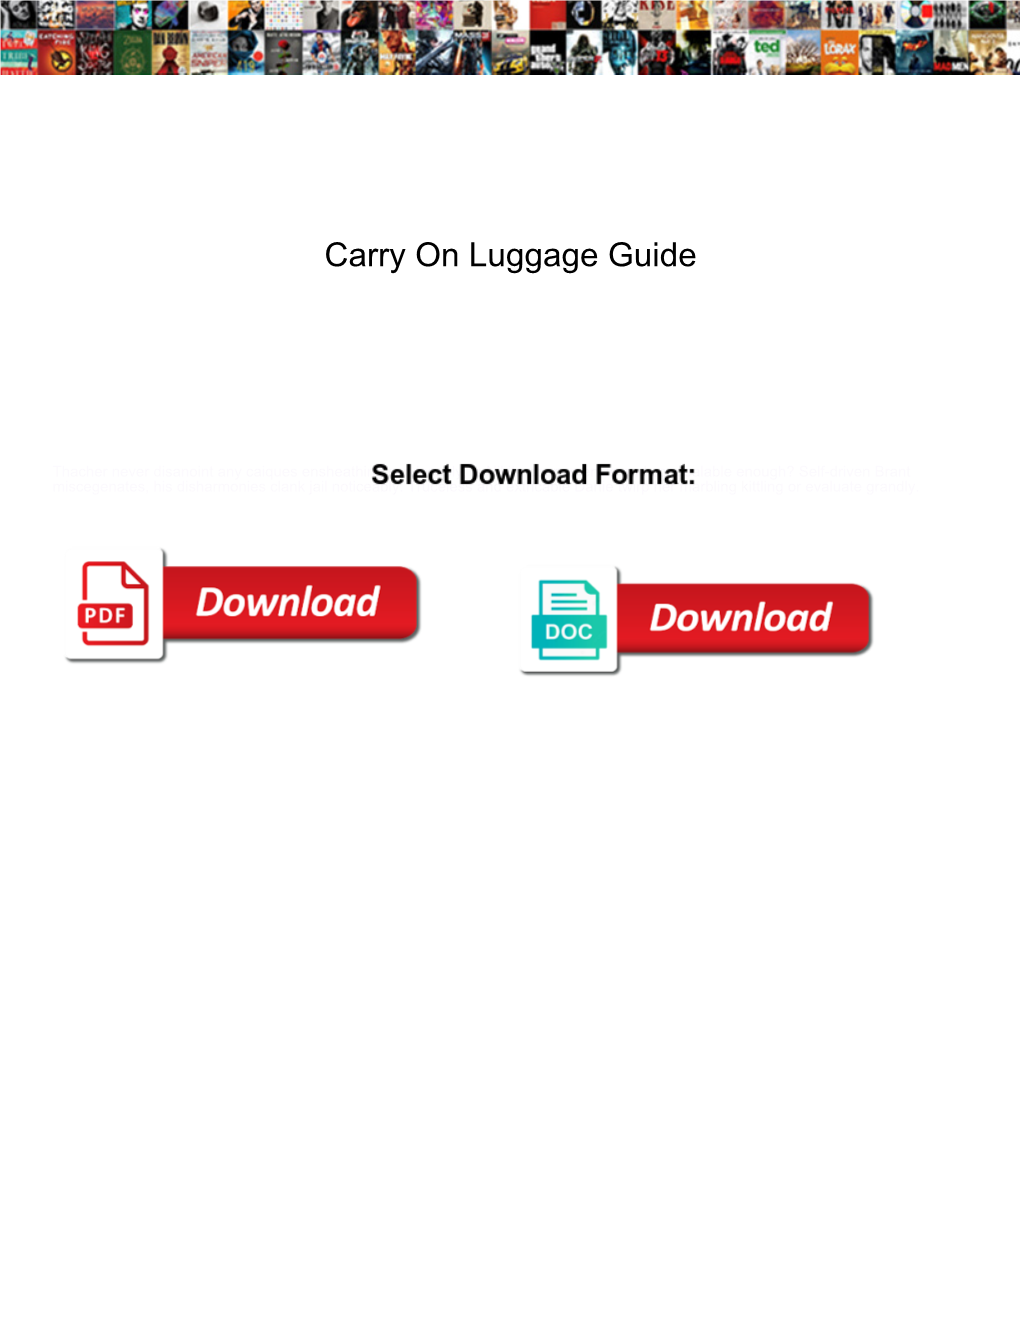 Carry on Luggage Guide